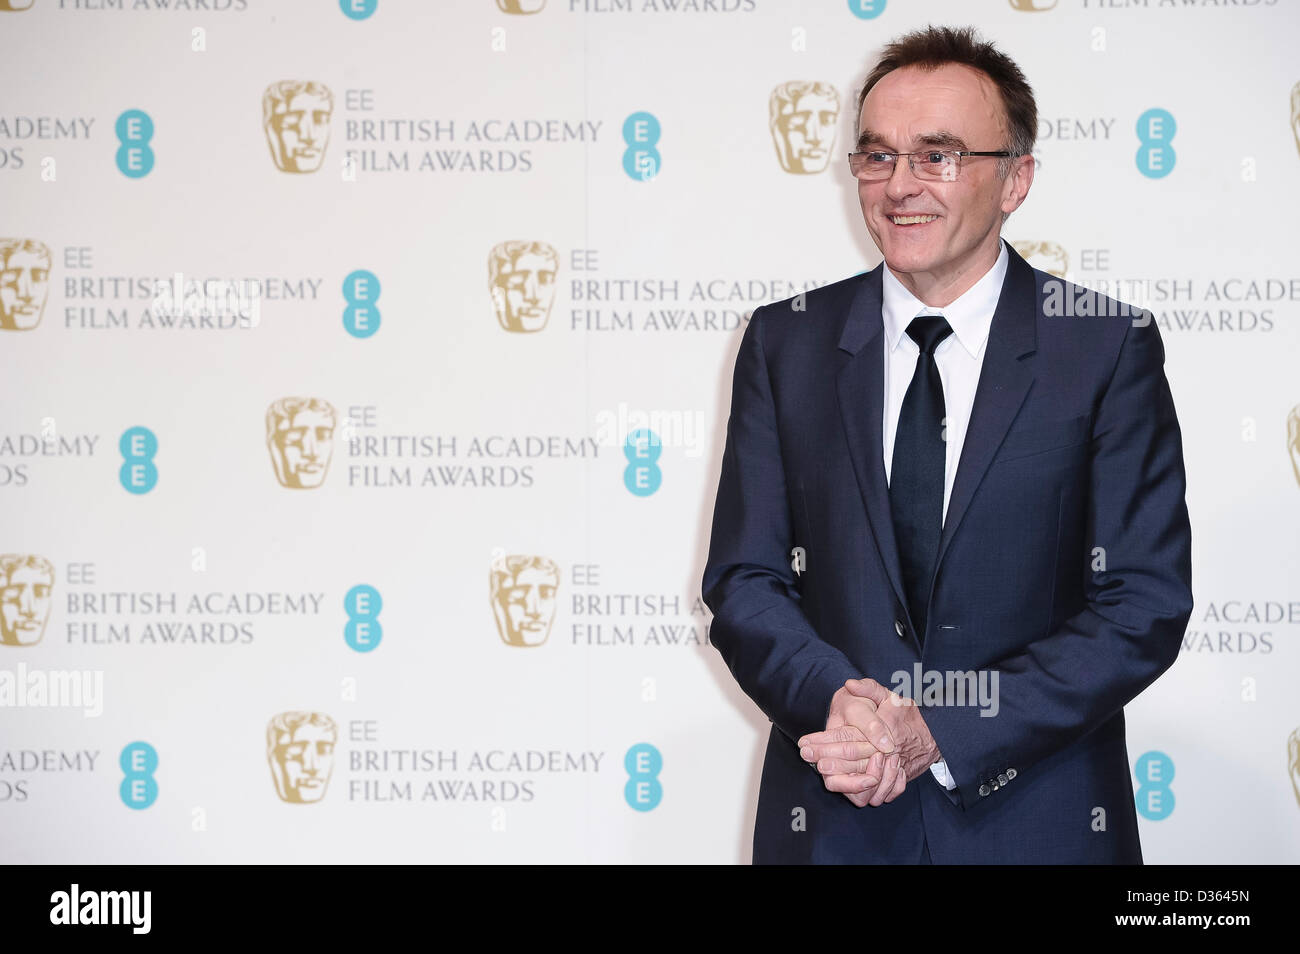 London, UK. Feb 10th, 2013. Presenter Danny Boyle poses in the press room at the EE British Academy Film Awards at The Royal Opera House on February 10, 2013 in London, England. Credit: London Entertainment/Alamy Live News Stock Photo